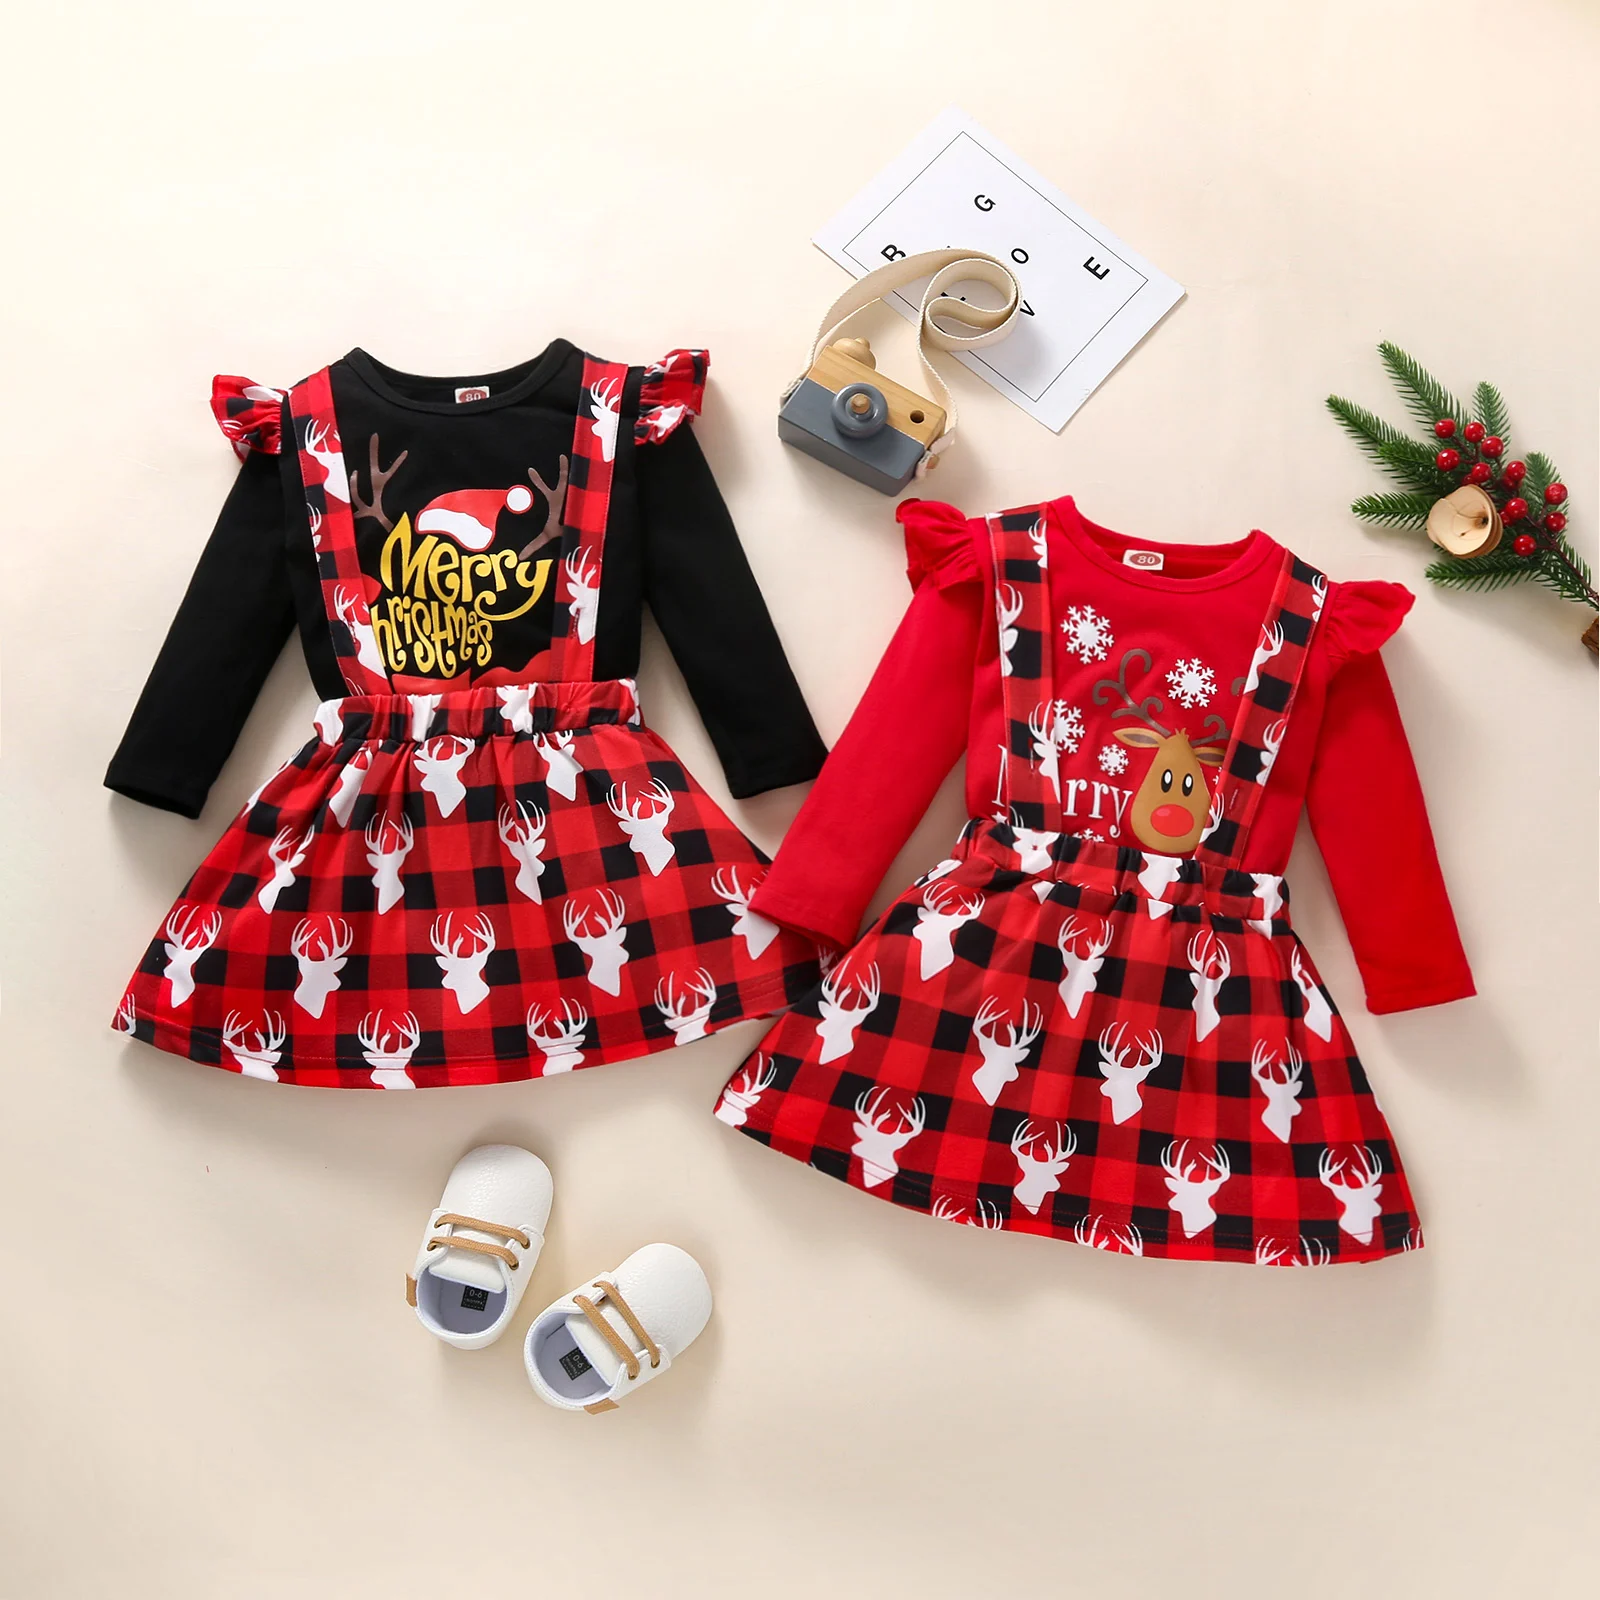 

2Pcs Toddler Christmas Outfits, Reindeer O-Neck Long Sleeves T-Shirt + Plaid Suspenders Skirt for Girls, 18 Months to 6 Years